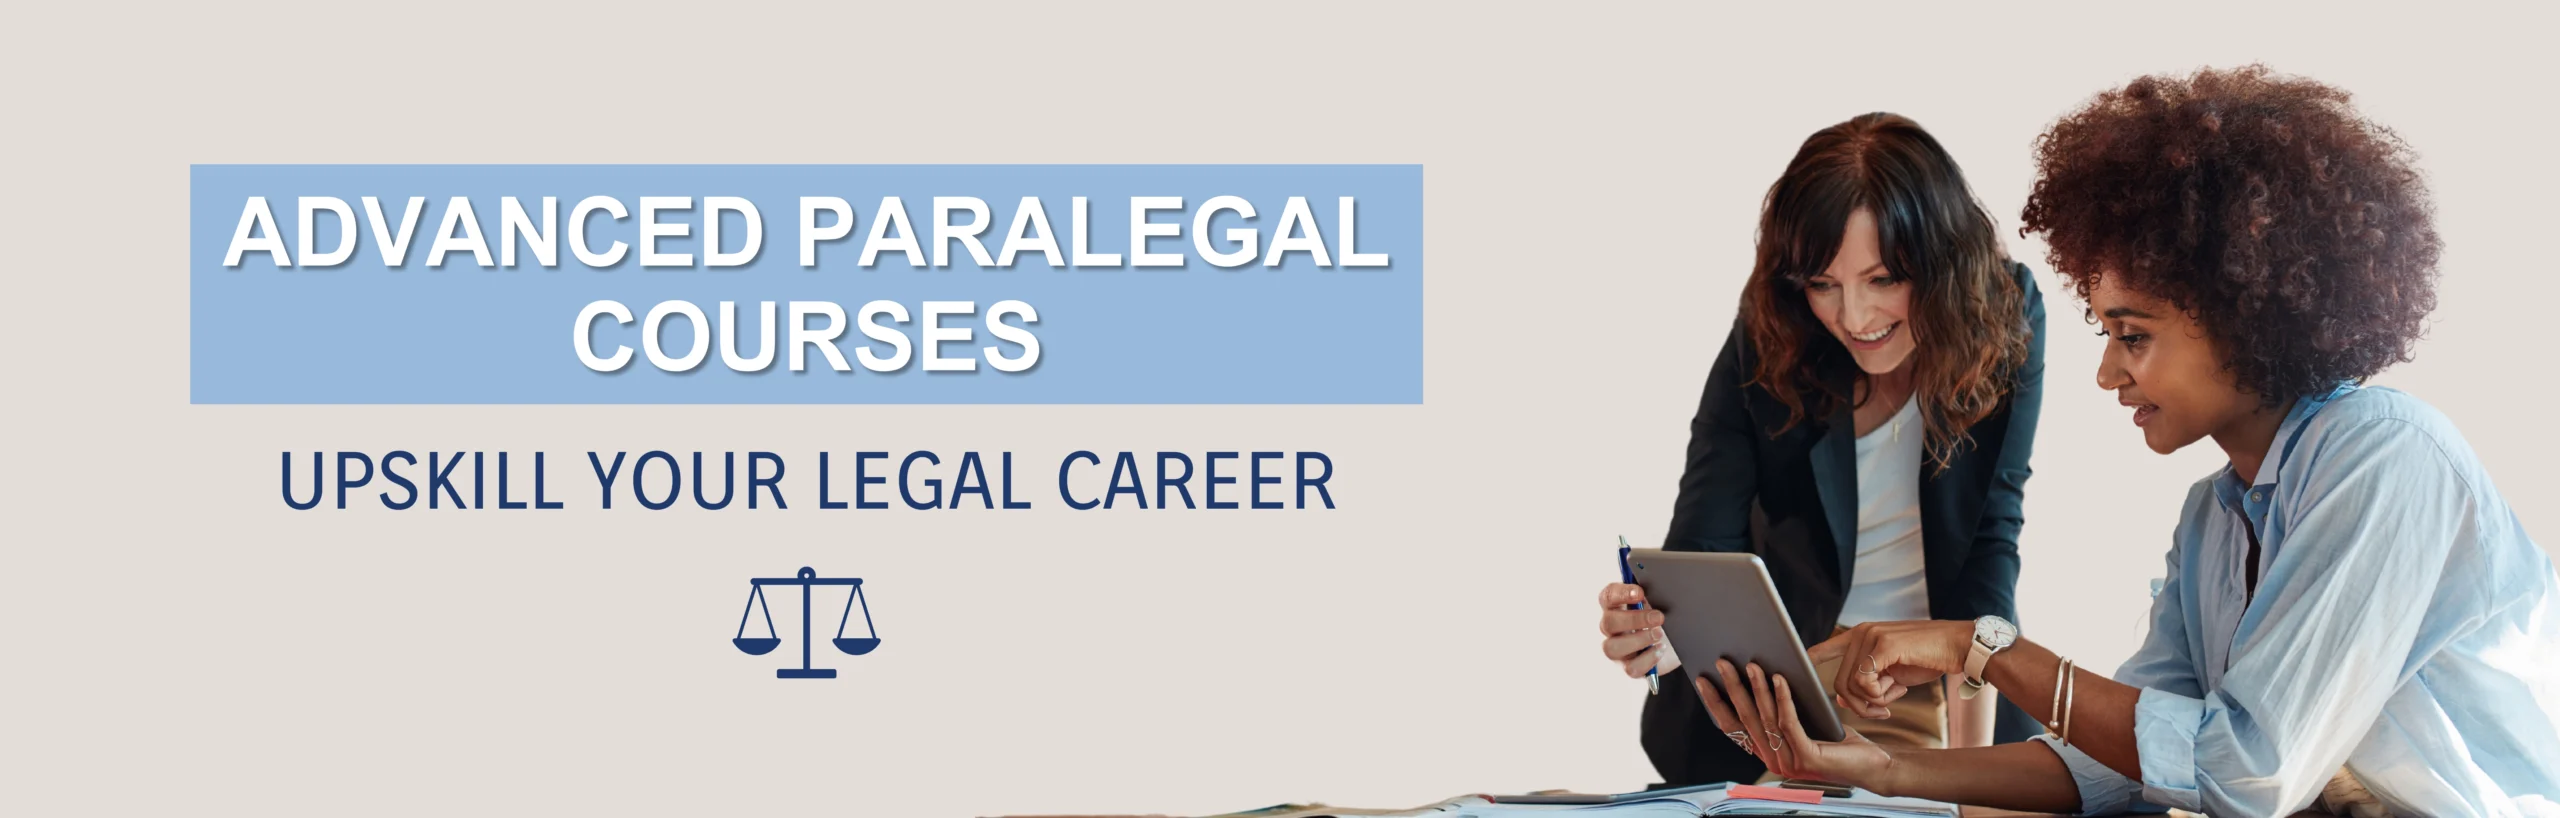 Advanced Paralegal Courses upskill your legal career